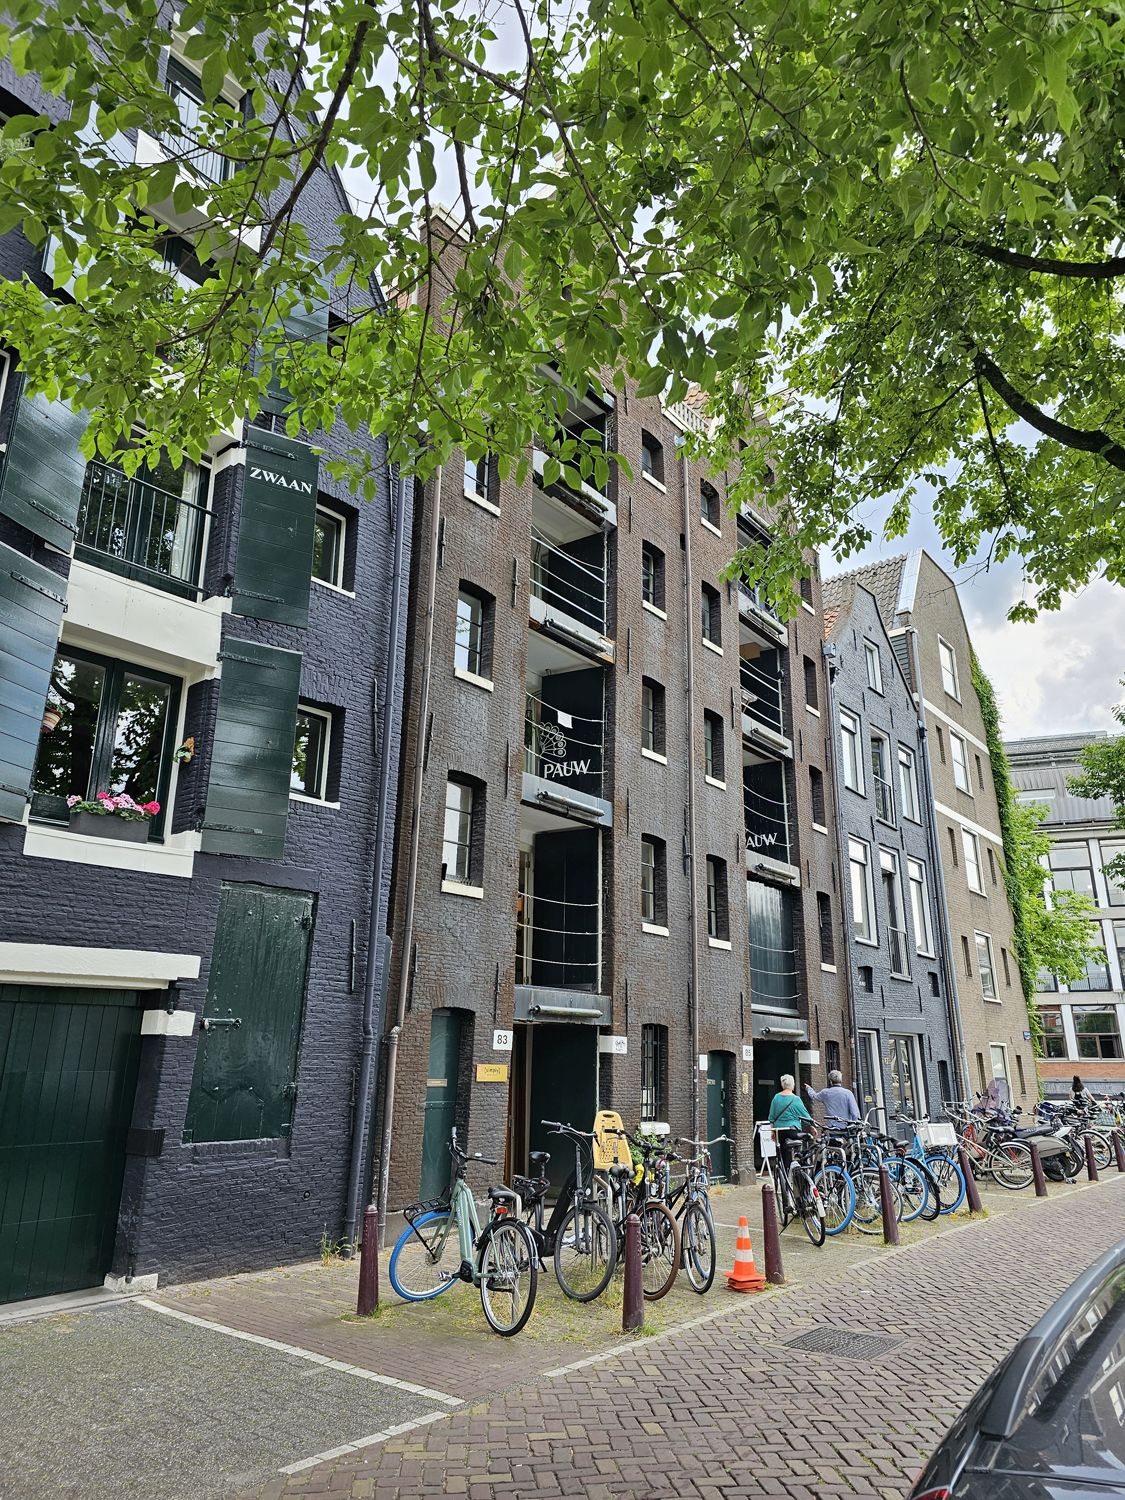 images/hm-law-oudeschans-amsterdam/hm-law-oudeschans-amsterdam-2.jpg#joomlaImage://local-images/hm-law-oudeschans-amsterdam/hm-law-oudeschans-amsterdam-2.jpg?width=1125&height=1500